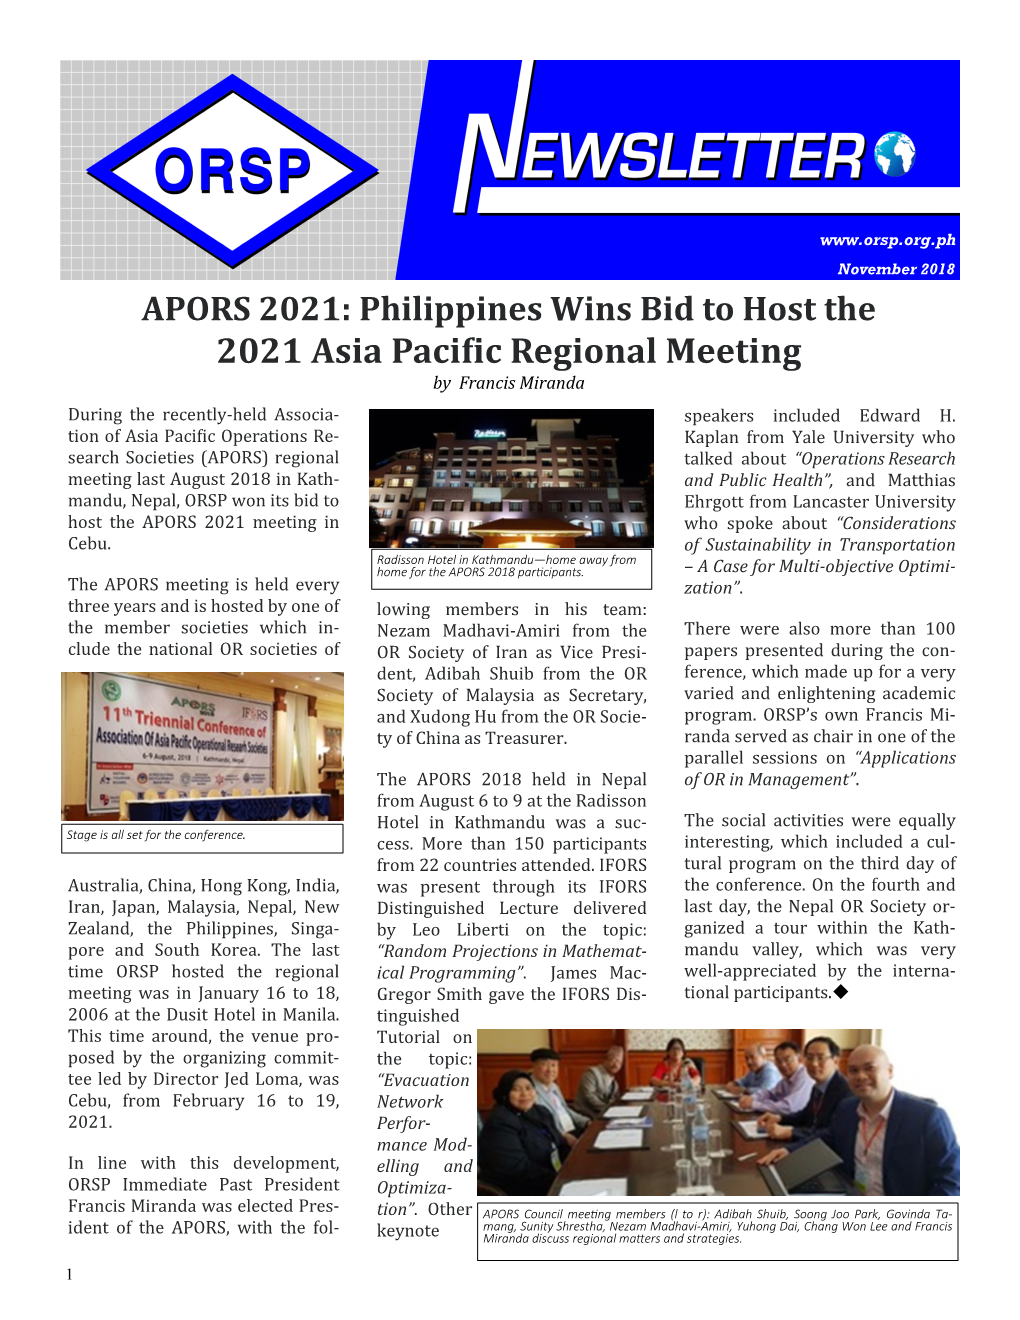 2021 Asia Pacific Regional Meeting by Francis Miranda During the Recently-Held Associa- Speakers Included Edward H